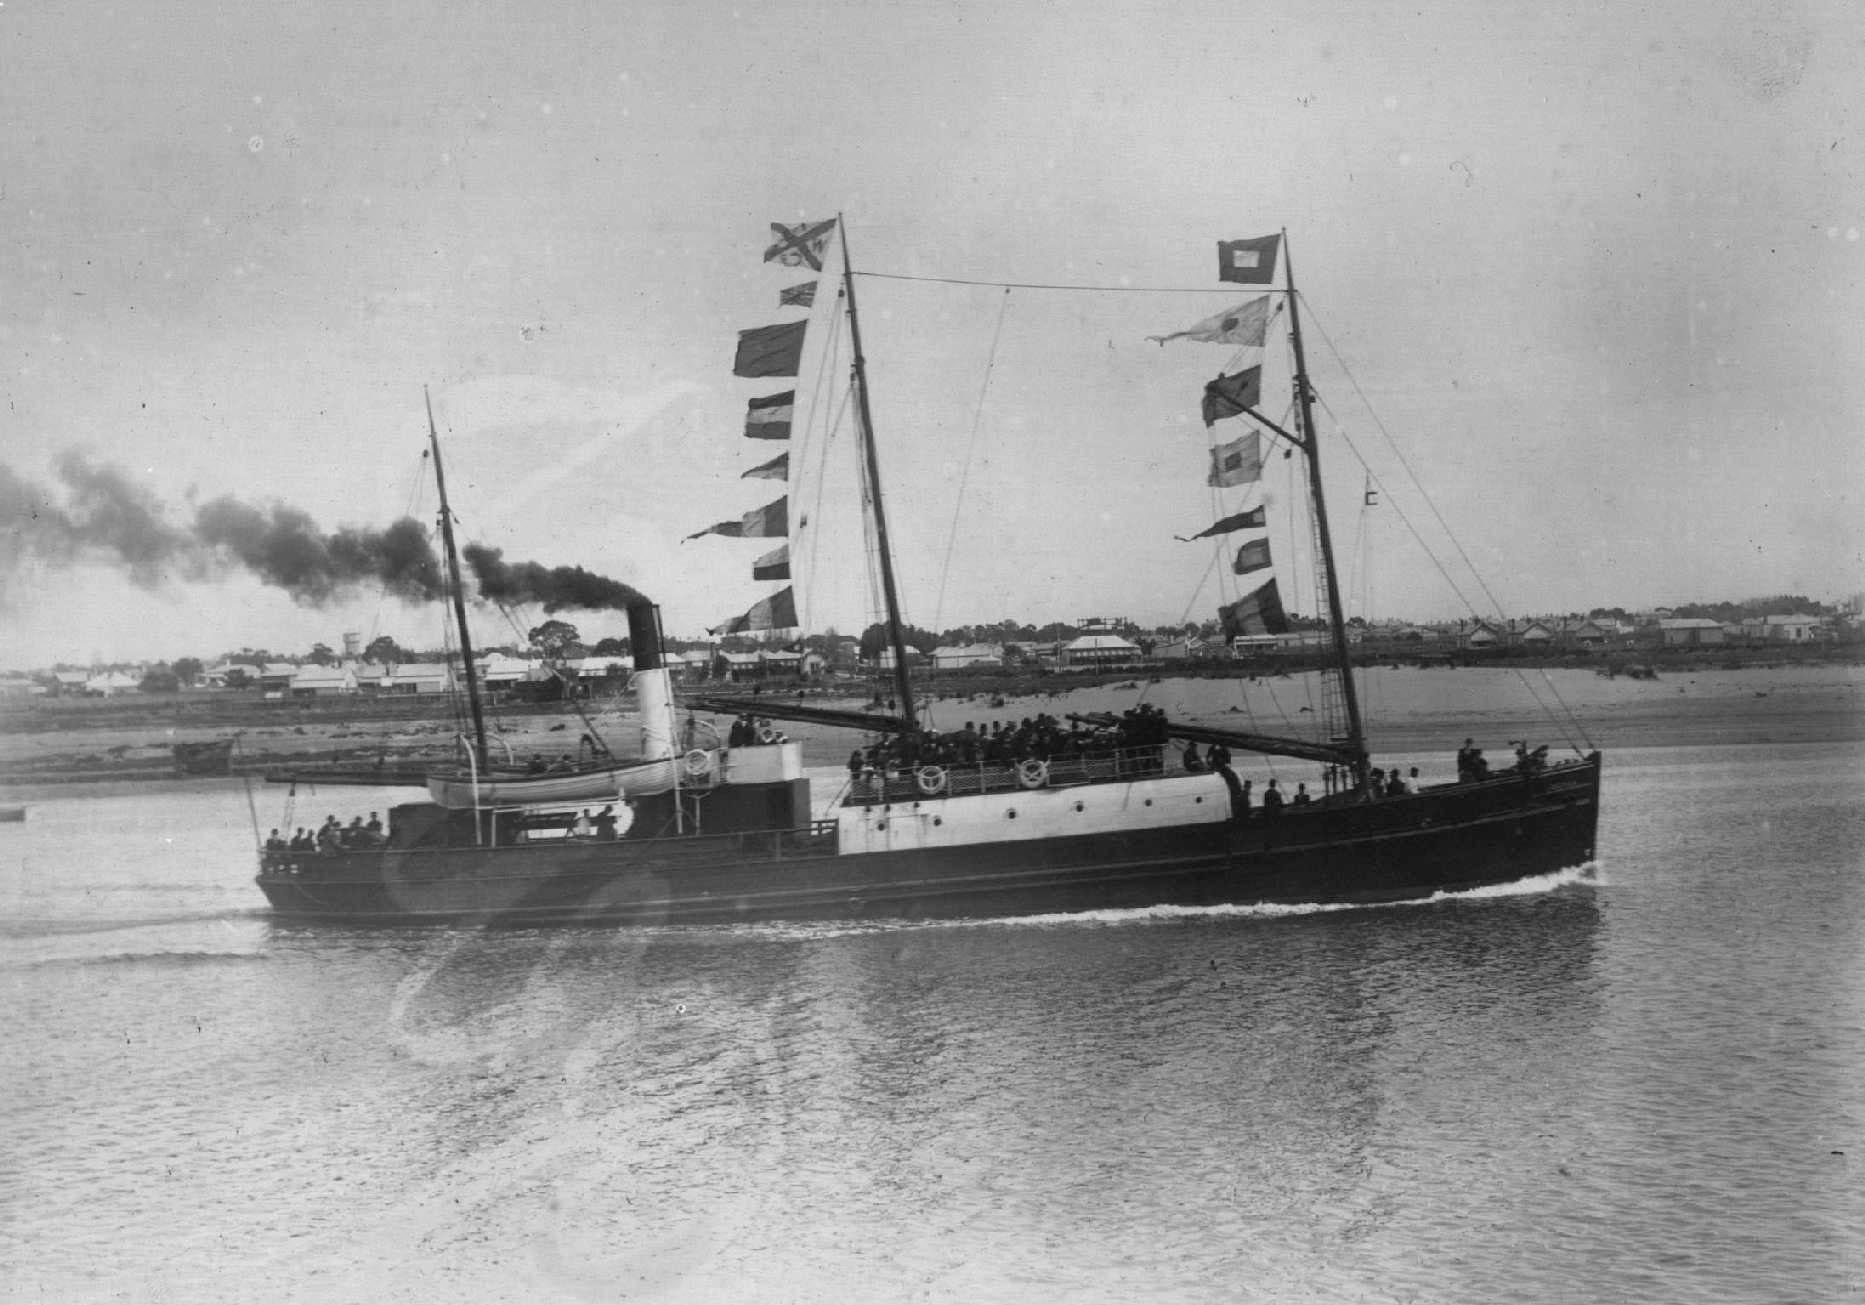 Built 1876 at Auckland by McQuarrie and McCallum for A. McGregor.  Official No. 70362.  163 gross tons, length 114 ft. x breadth 20 ft. x depth 7 ft.  Acquired by A.W. Sandford & Co. in July 1898 who put her on the West Coast run in 1899 and switched her 